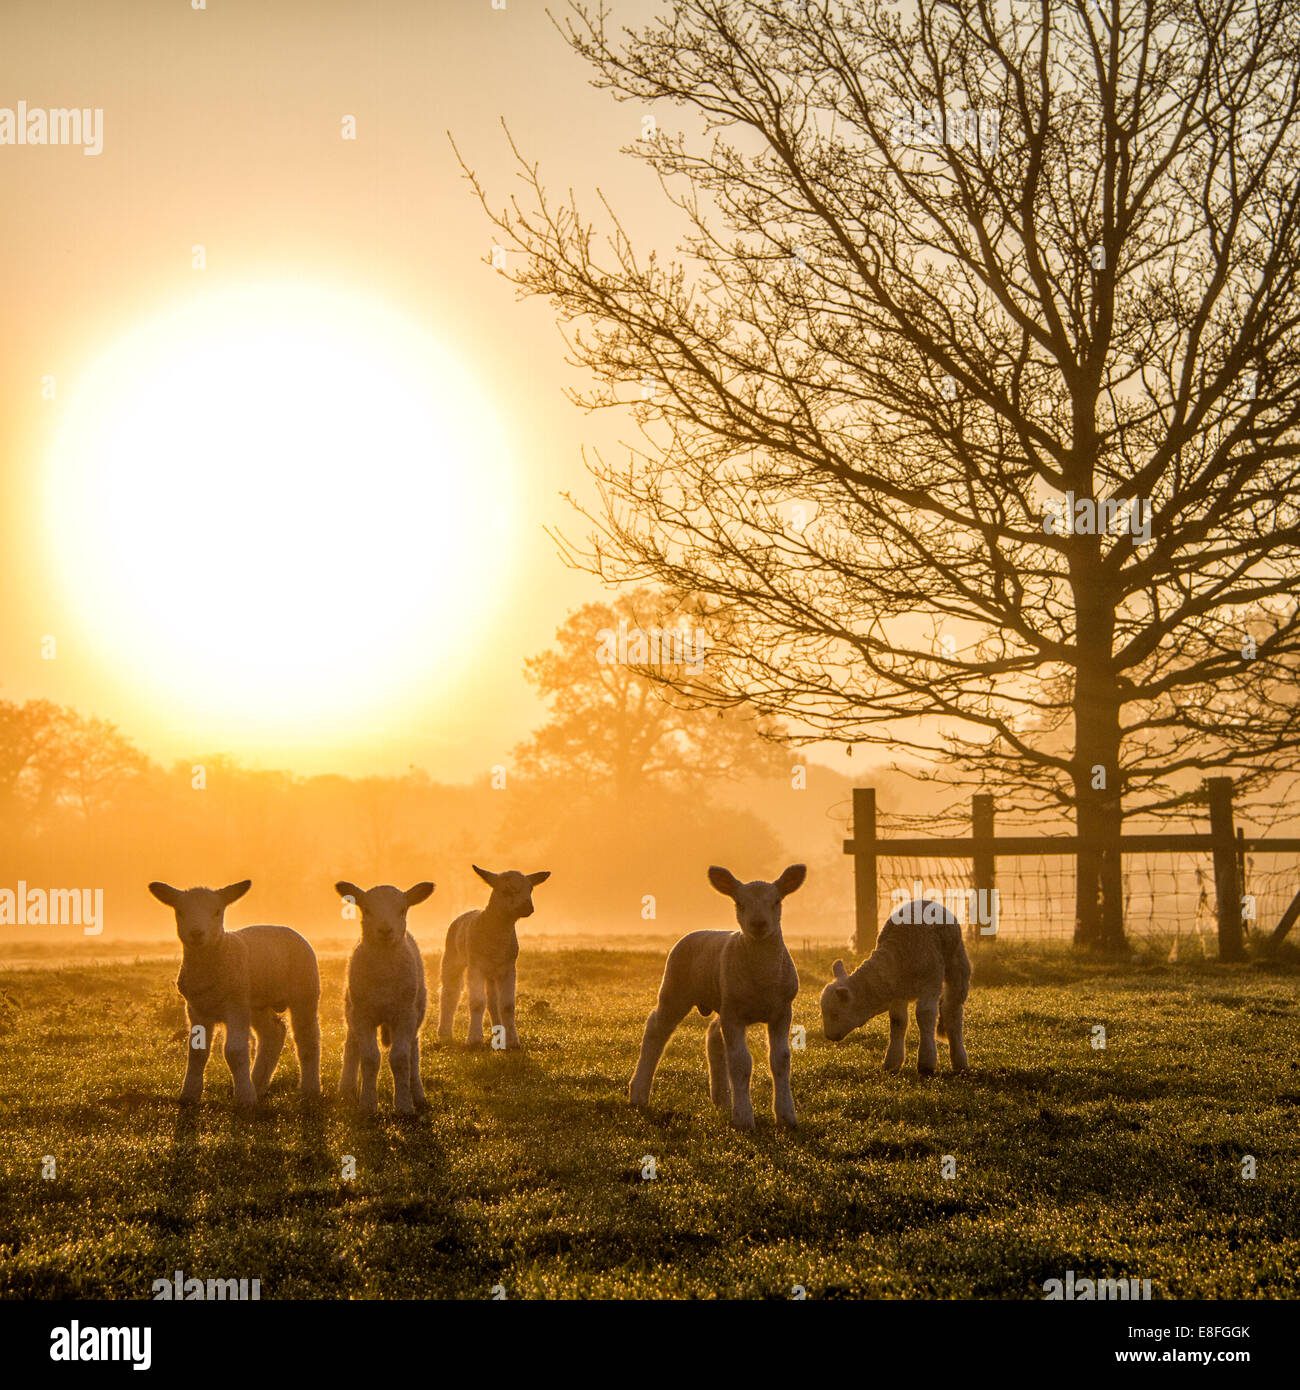 Flock of lambs in a field at sunset, England, United Kingdom Stock Photo